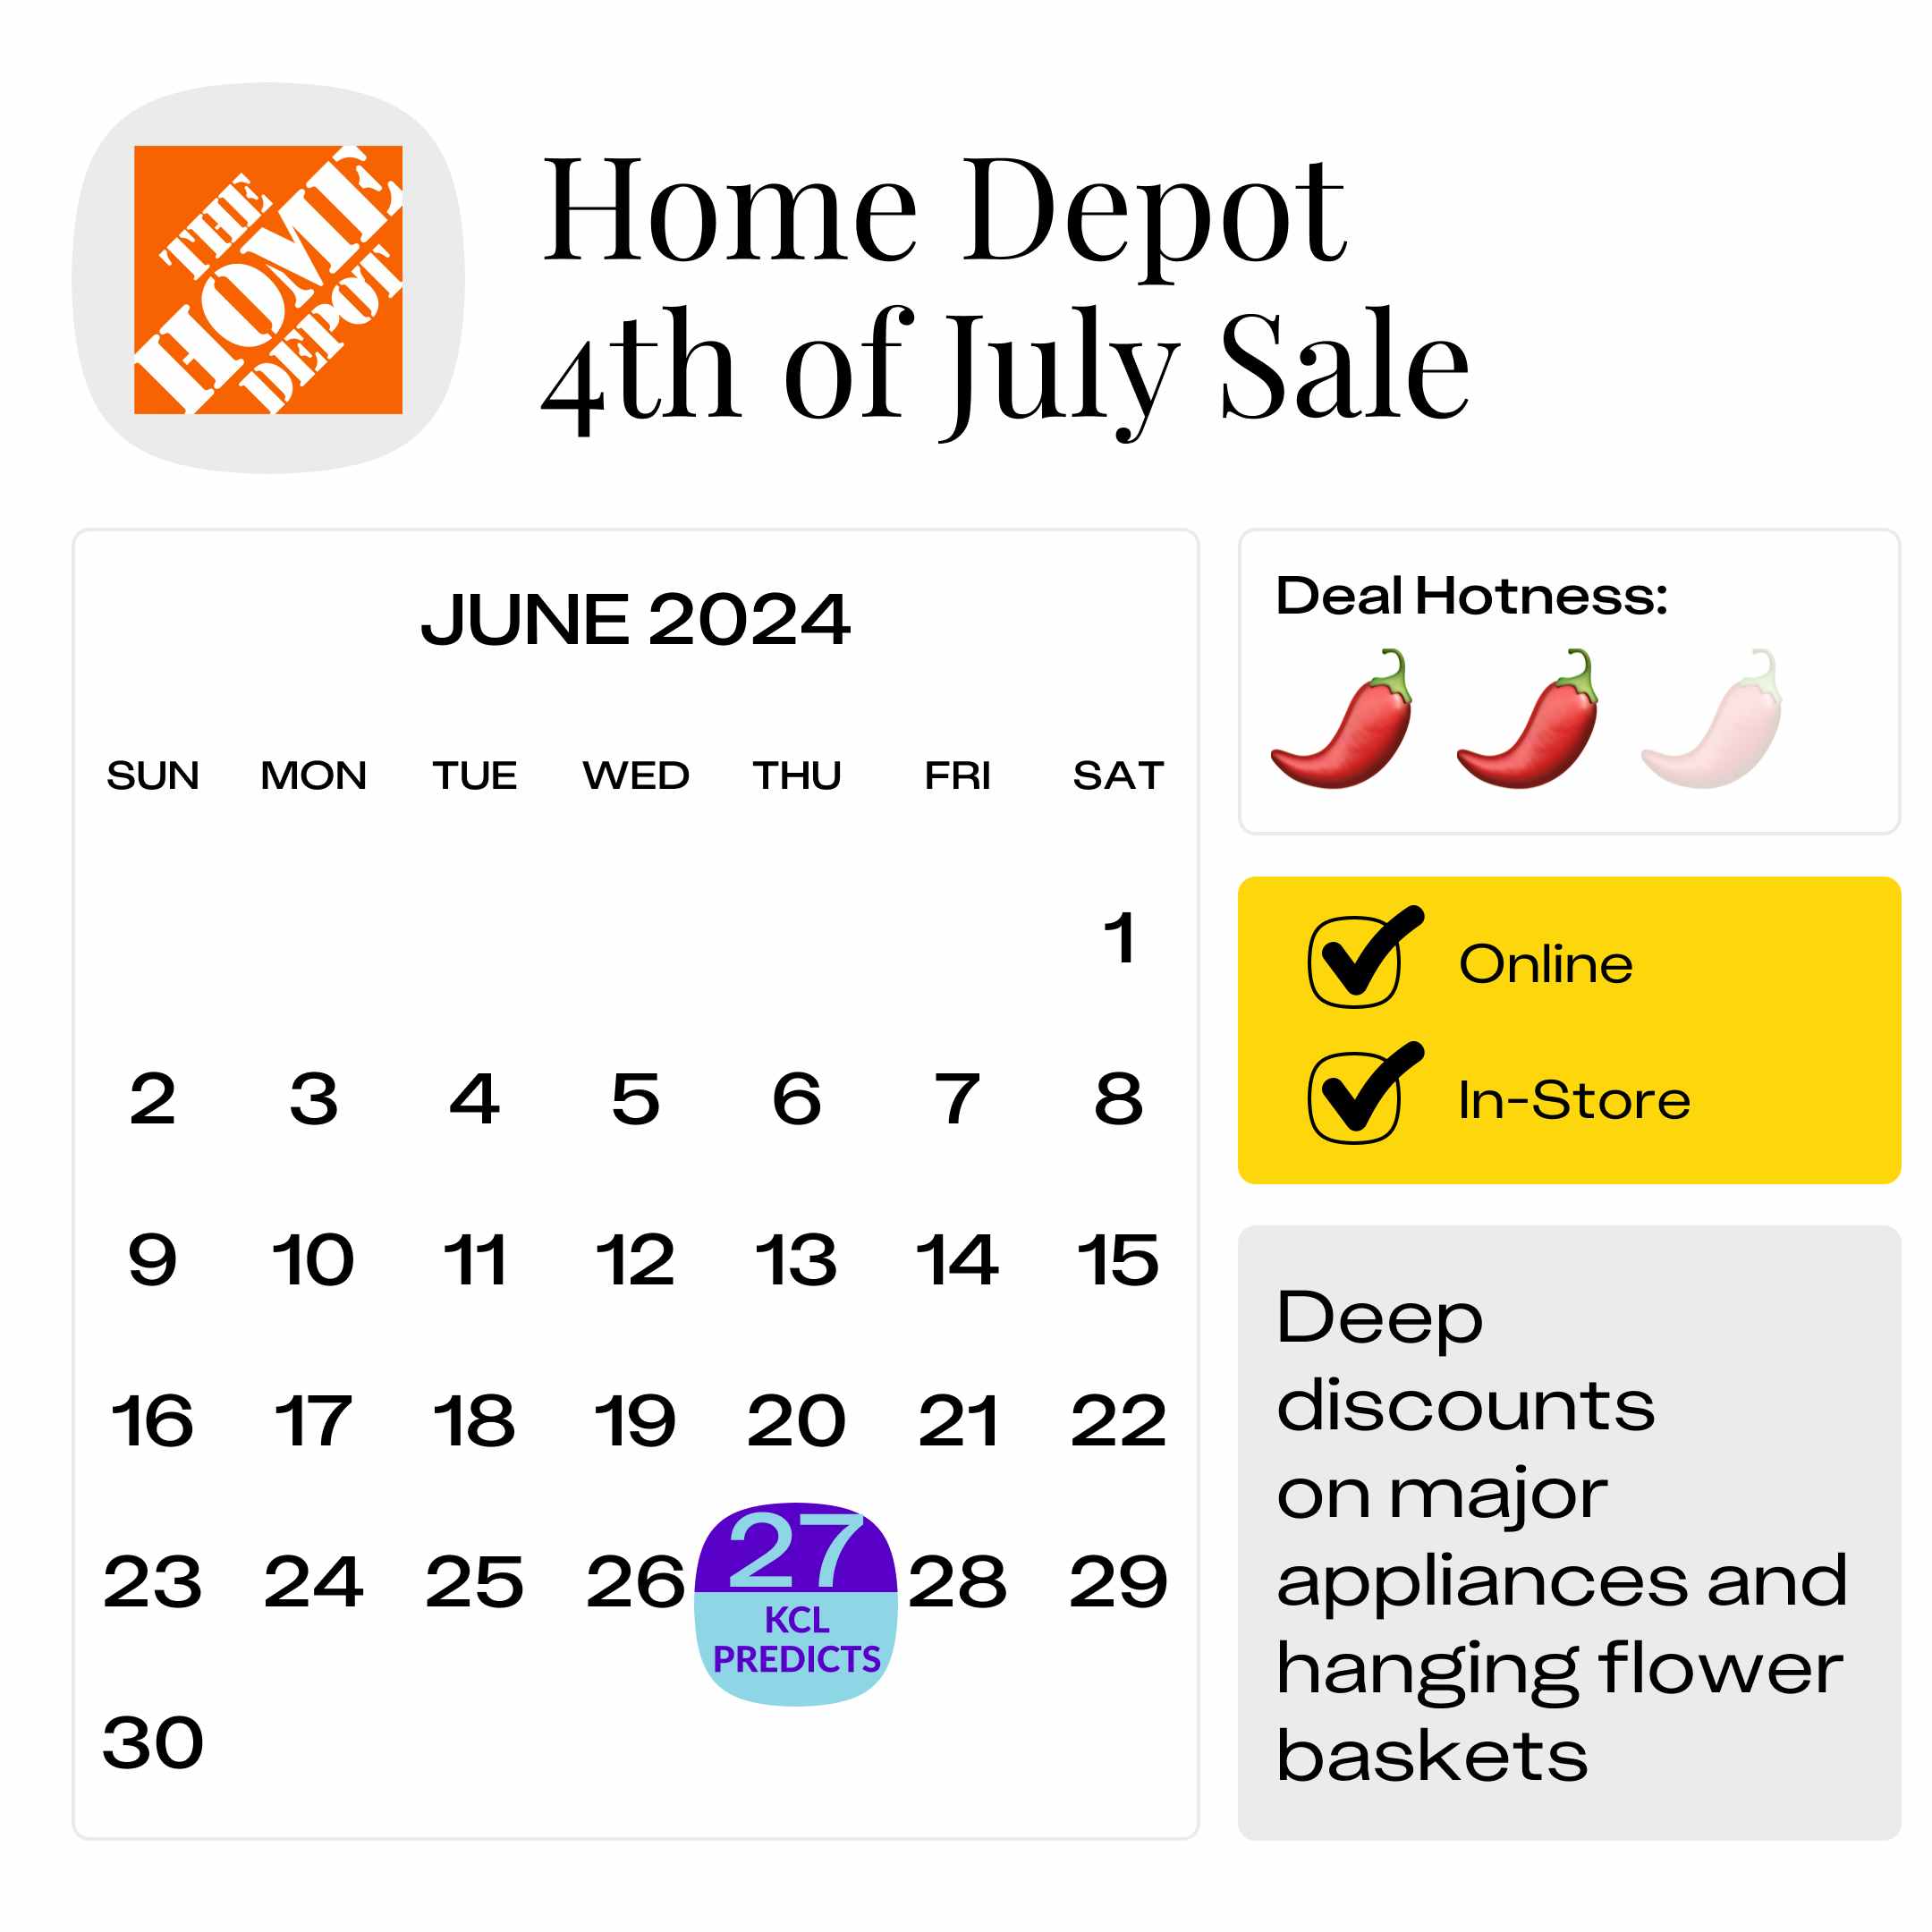 The predicted home depot 4th of July sale start date: June 27, 2024